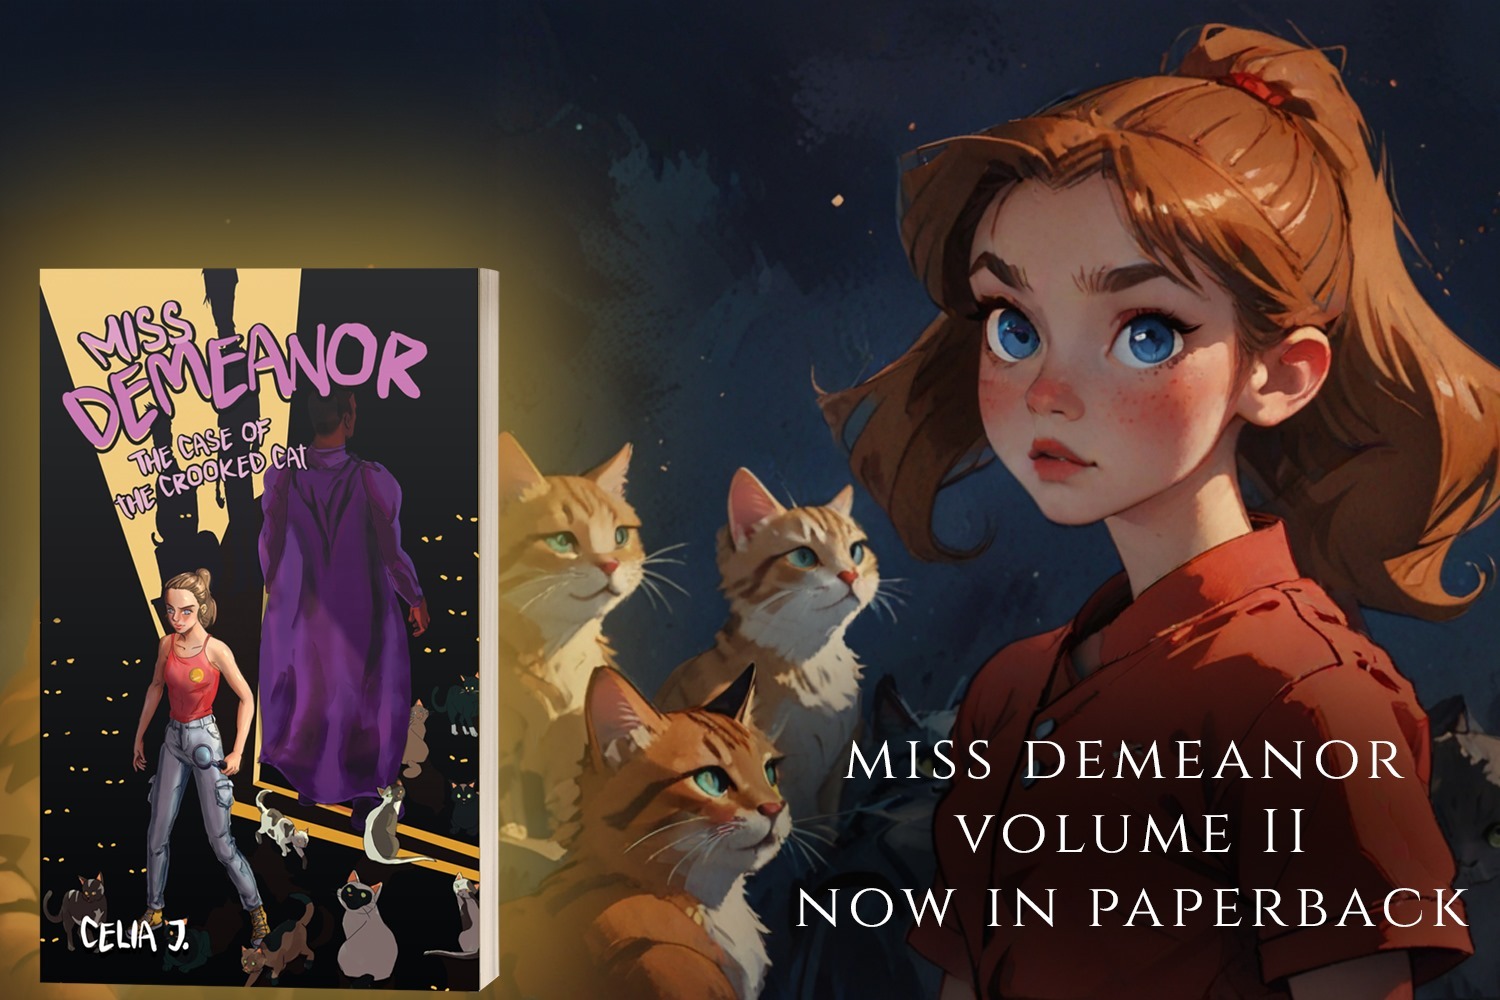 Miss Demeanor: The Case of the Crooked Cat by Celia J,  now available from Histria Books.